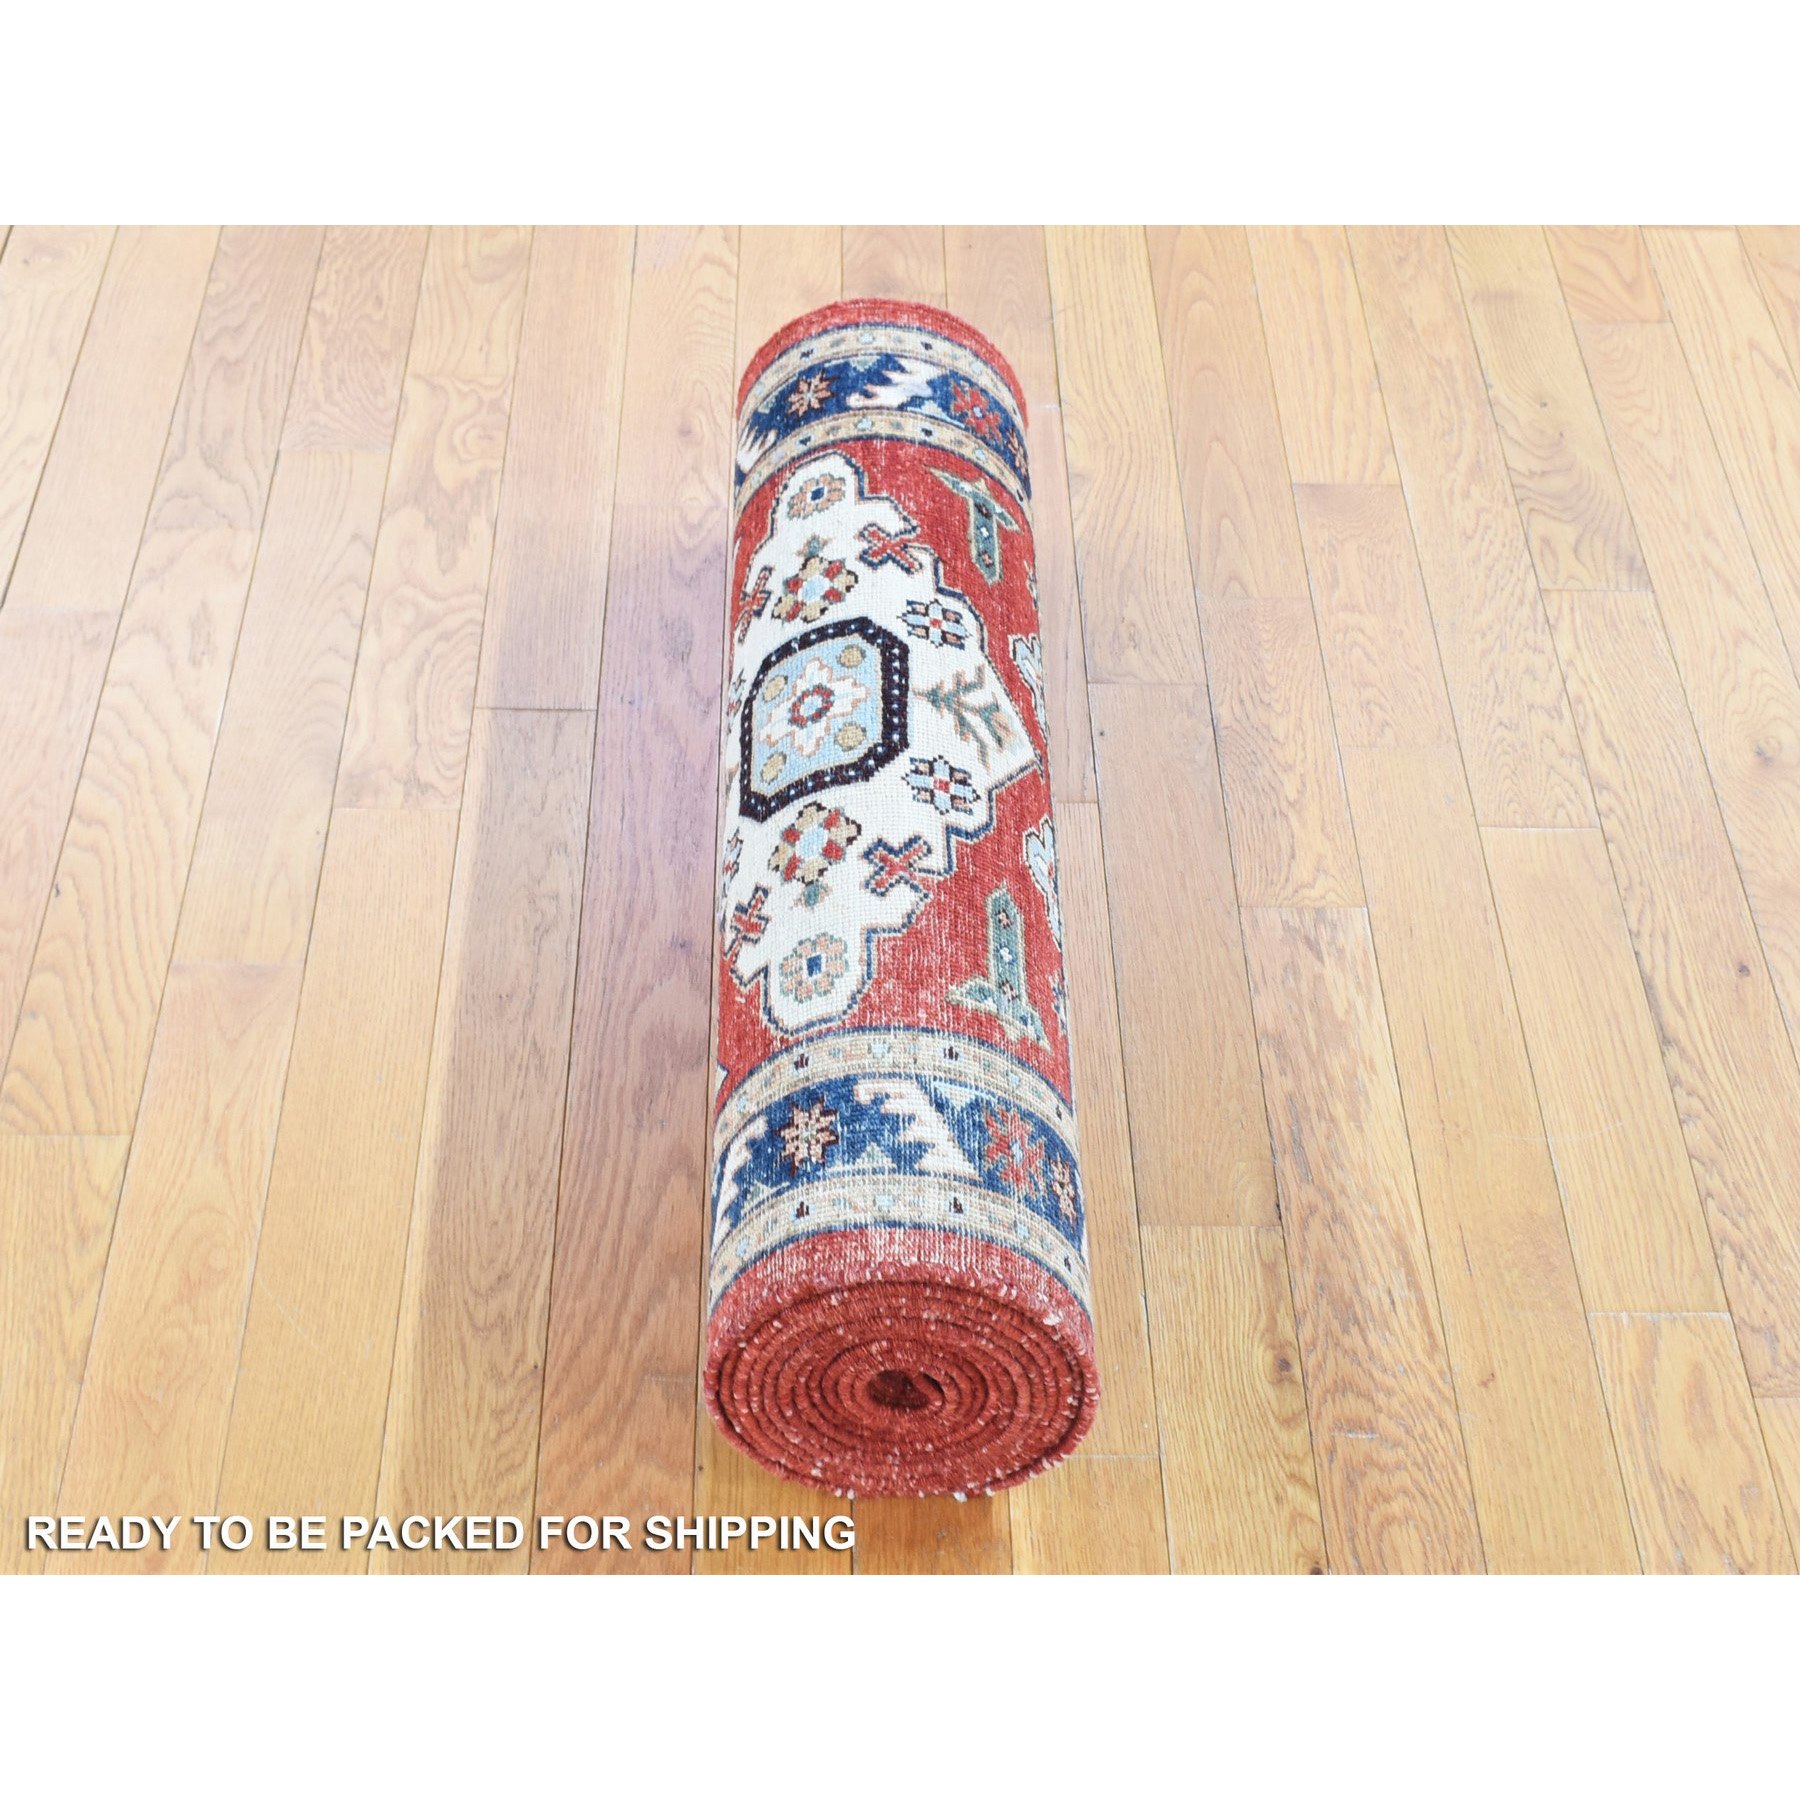 2'8"x13'9" Tomato Red, Peshawar with Northwest Persian Design, Vegetable Dyes Pure Wool Hand Woven, Runner Oriental Rug 